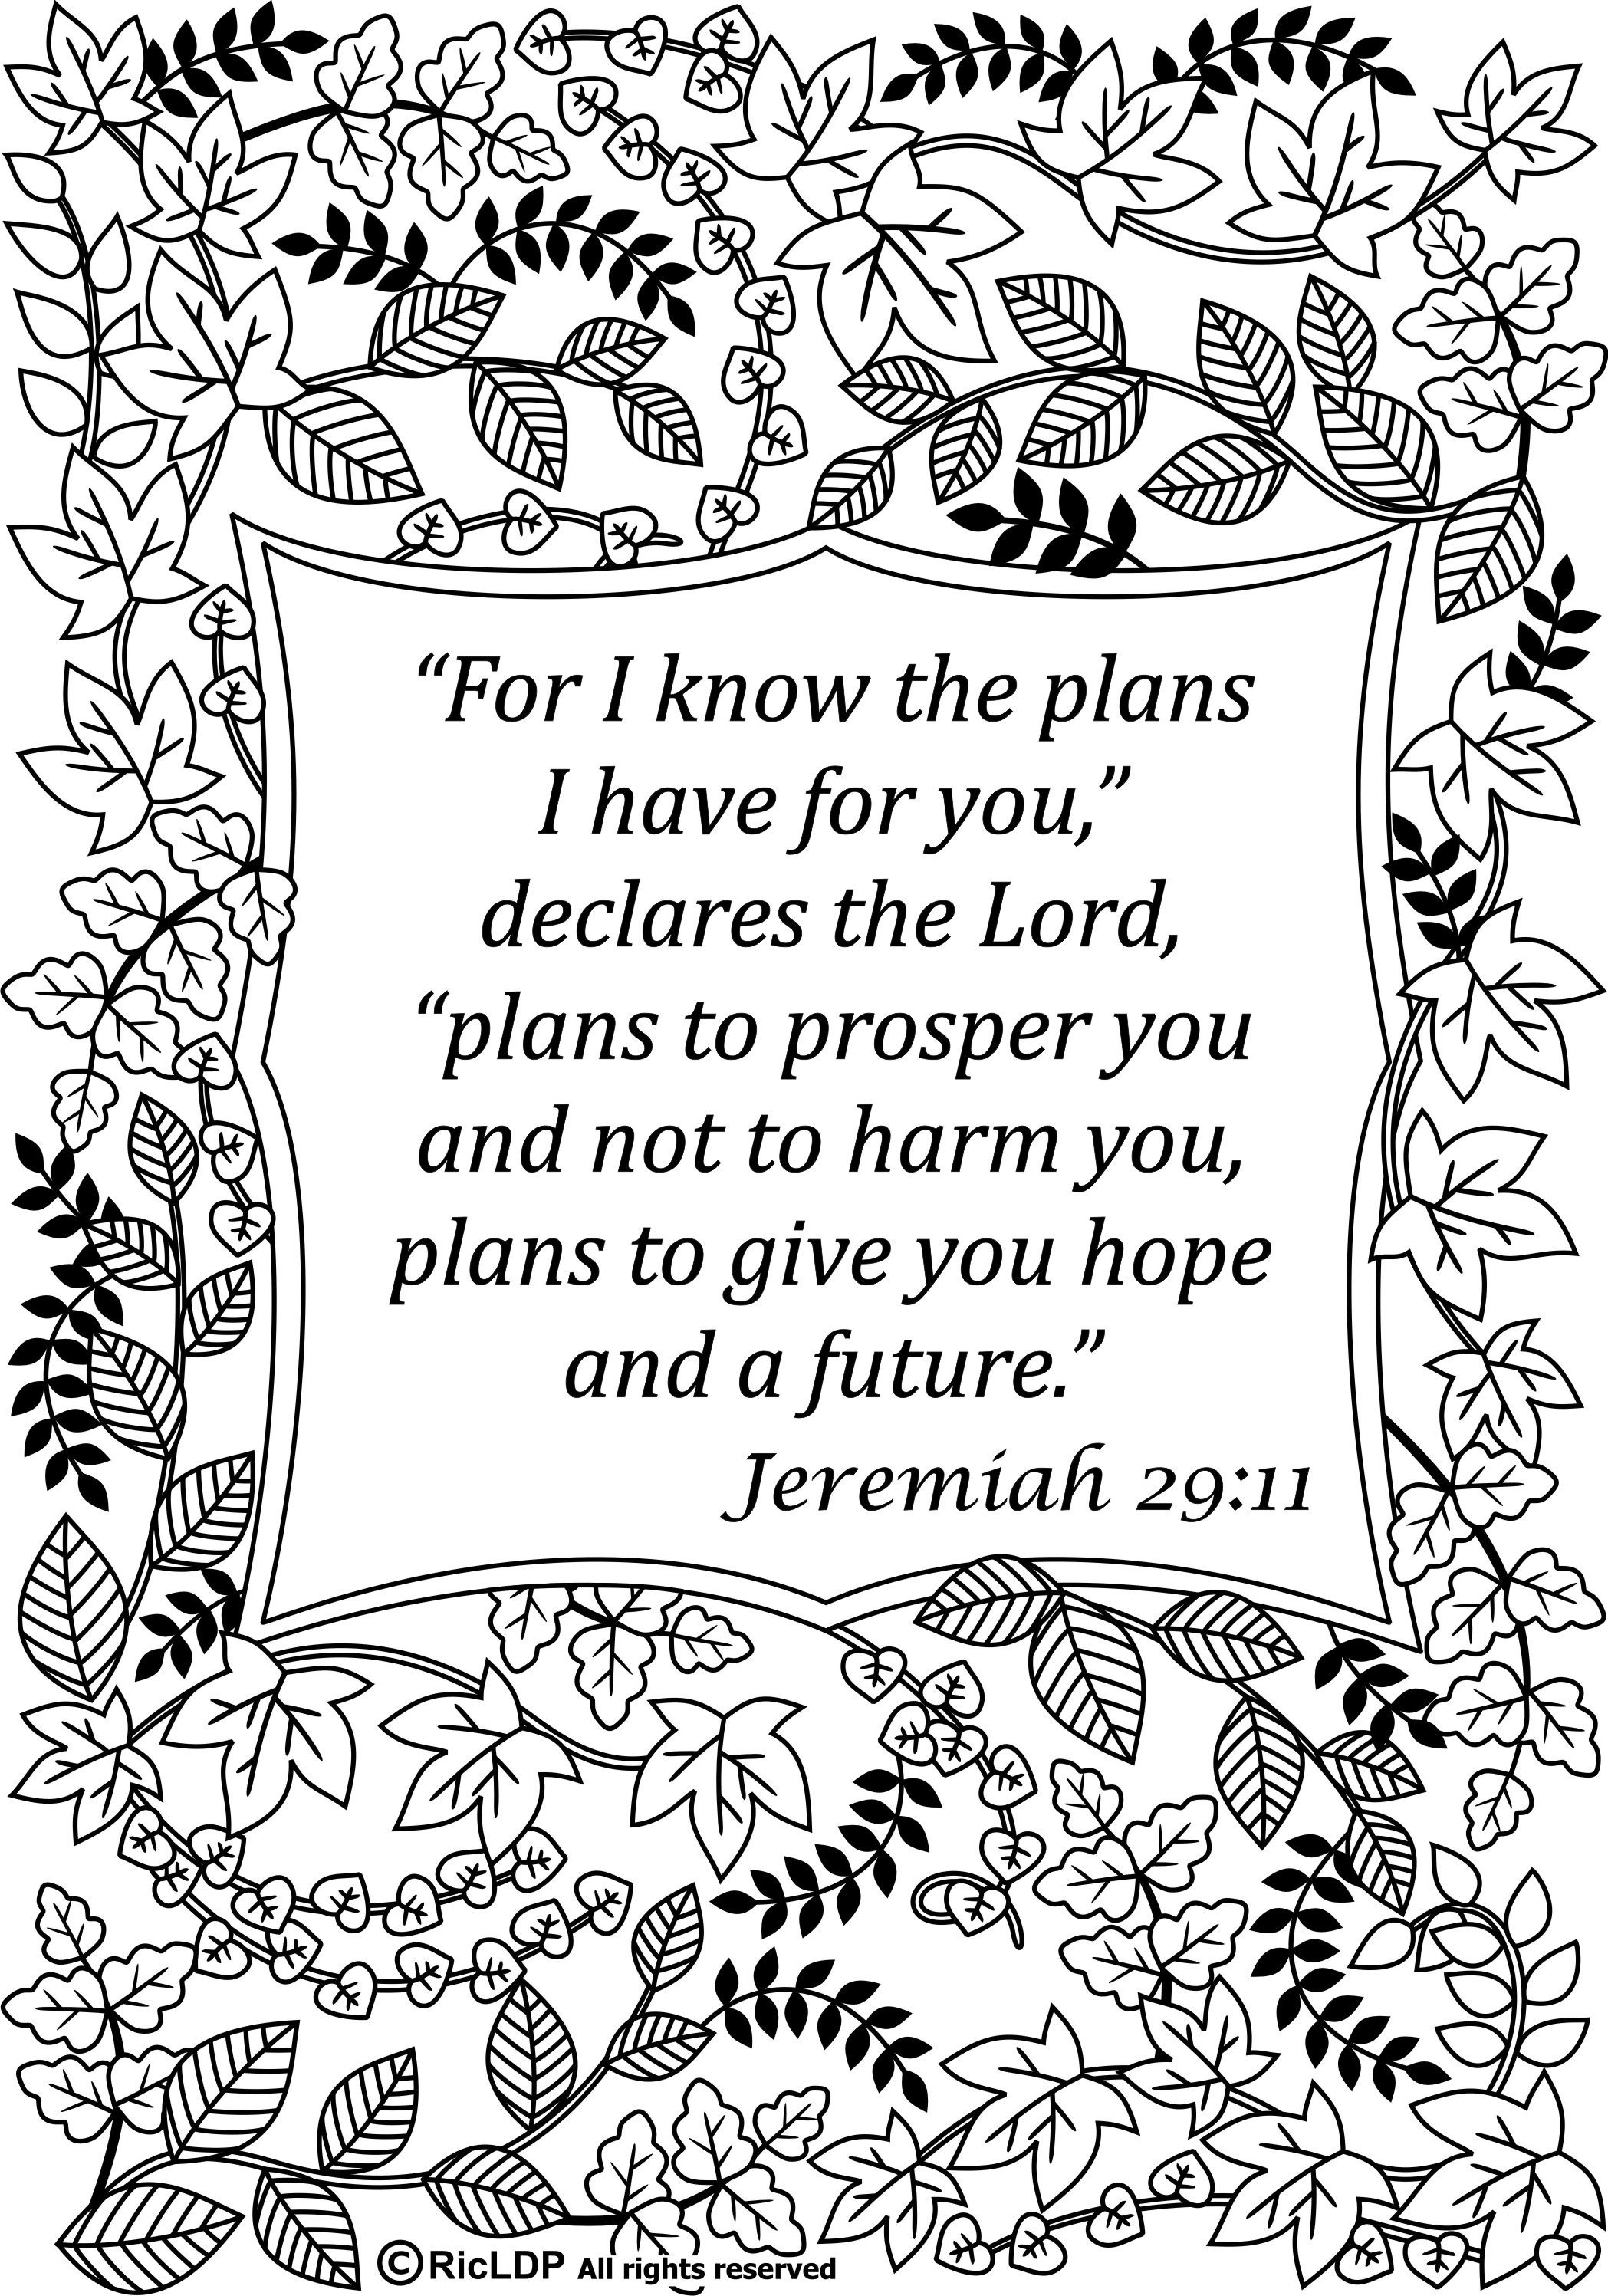 15 Bible Verses Coloring Pages | Coloring Pages With Bible Verses - Free Printable Bible Verses Adults